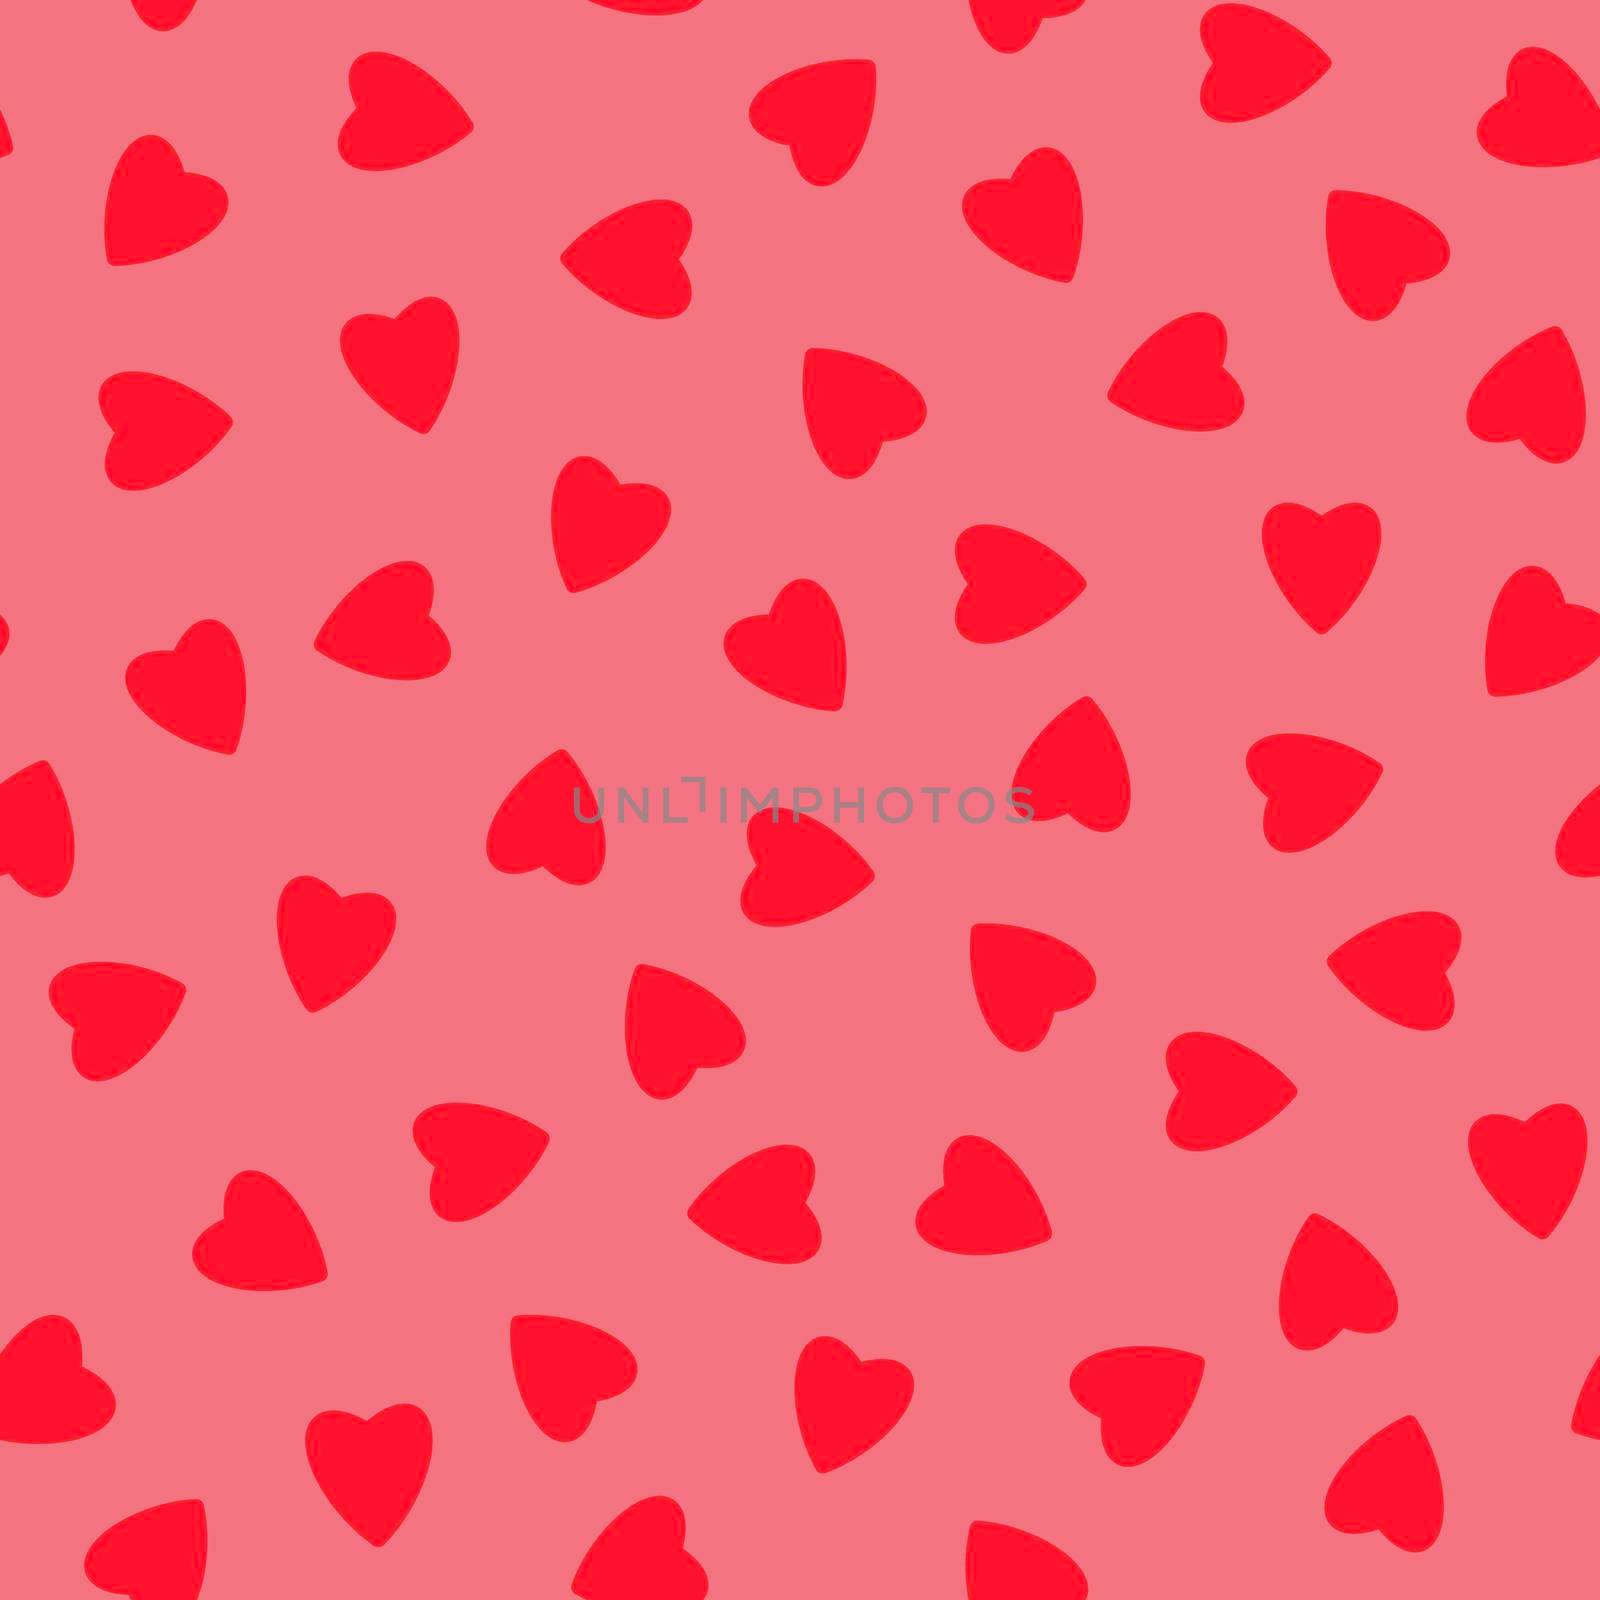 Simple hearts seamless pattern,endless chaotic texture made of tiny heart silhouettes.Valentines,mothers day background.Great for Easter,wedding,scrapbook,gift wrapping paper,textiles.Red on pink by Angelsmoon